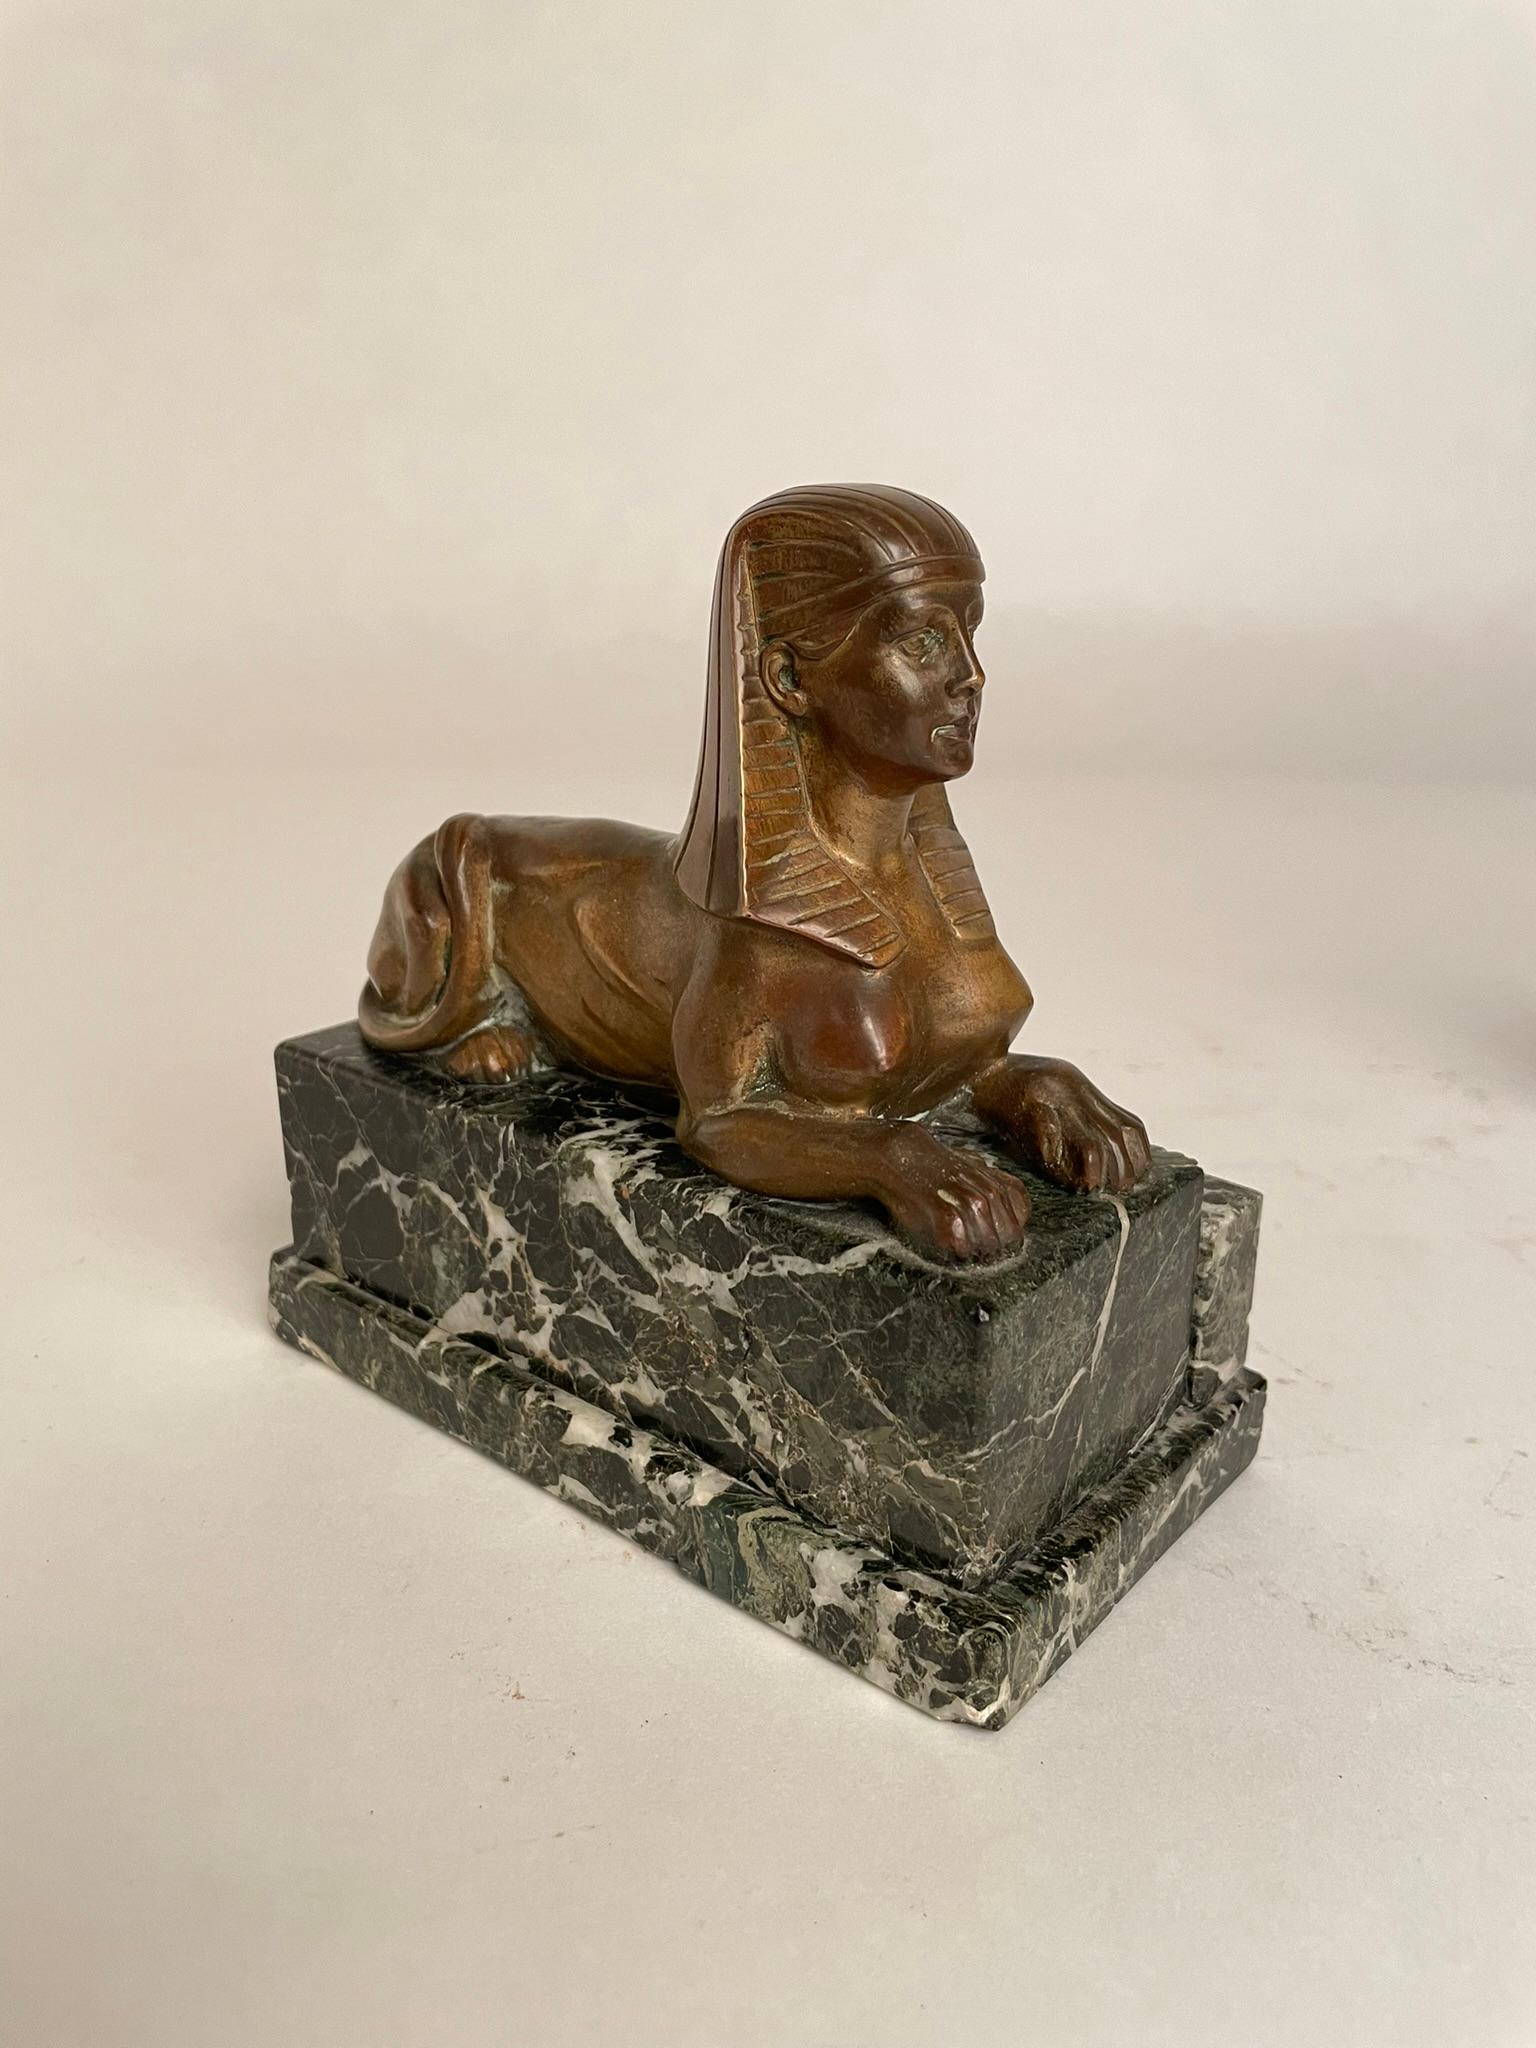 A pair of French Empire bronze models of recumbent Sphinxes on Verdi Antico marble bases. The bronze with the warm golden patina of age. The custom marble bases, stepped on one side were likely made to be used as book ends. These make a handsome